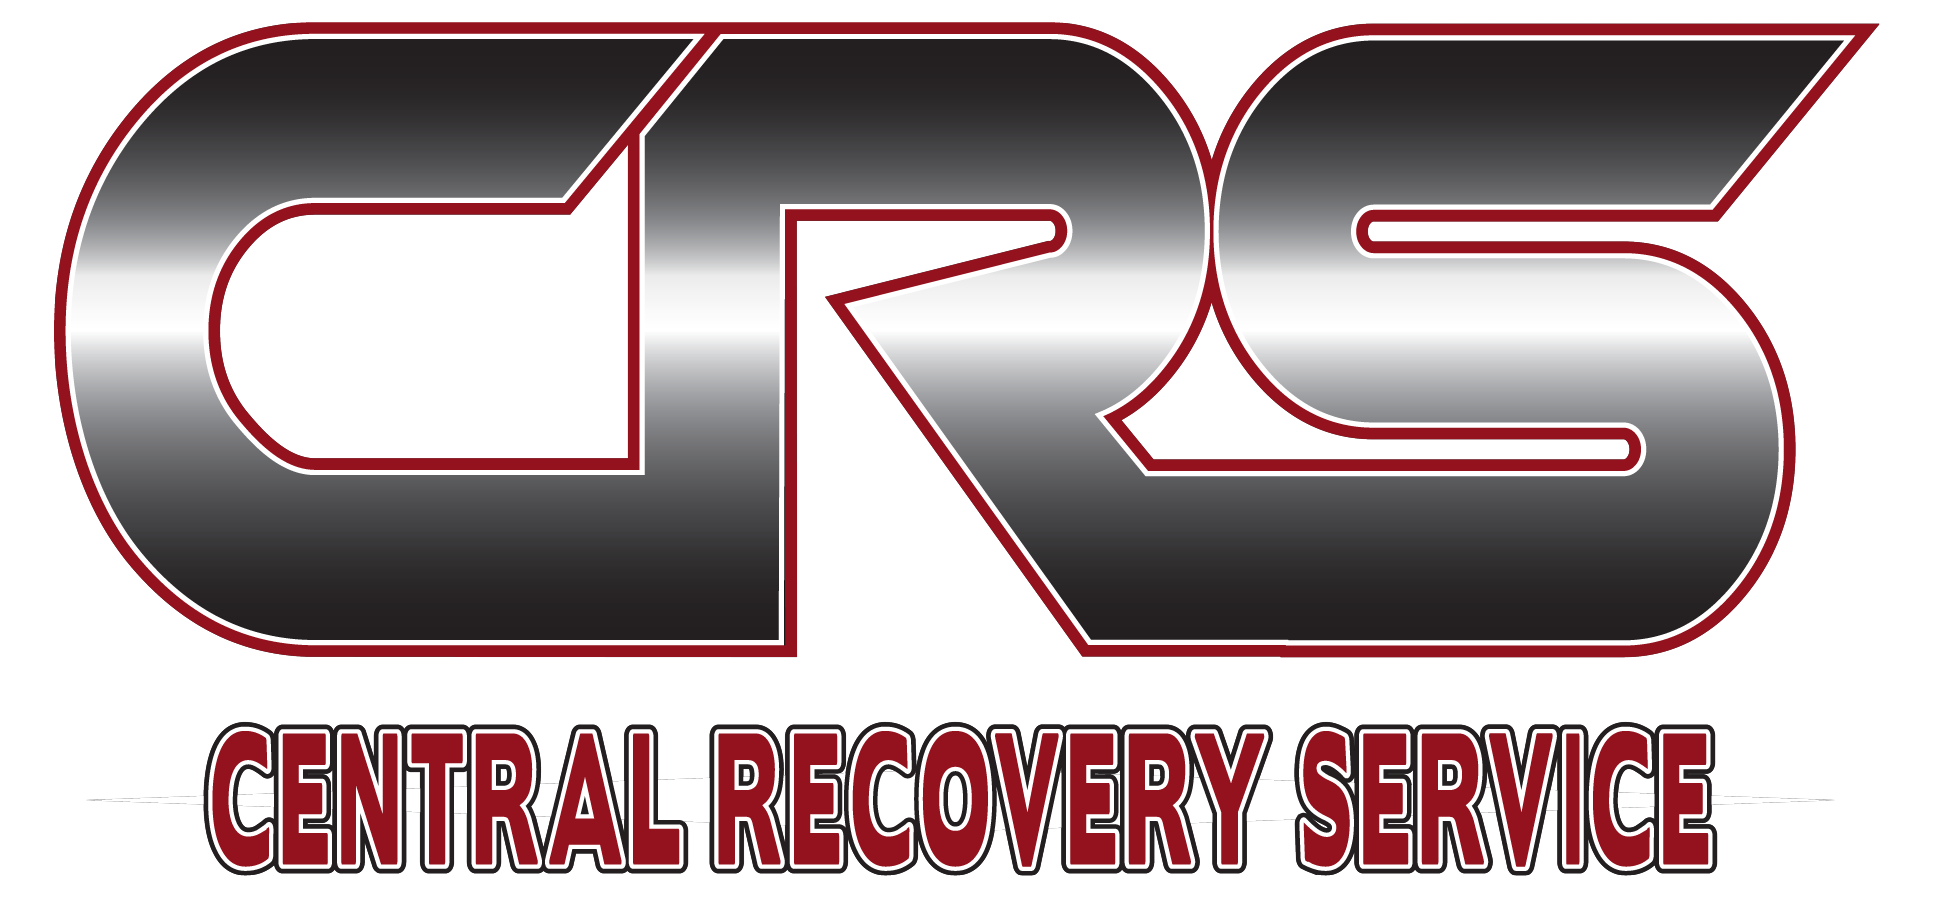 Central Recovery Service